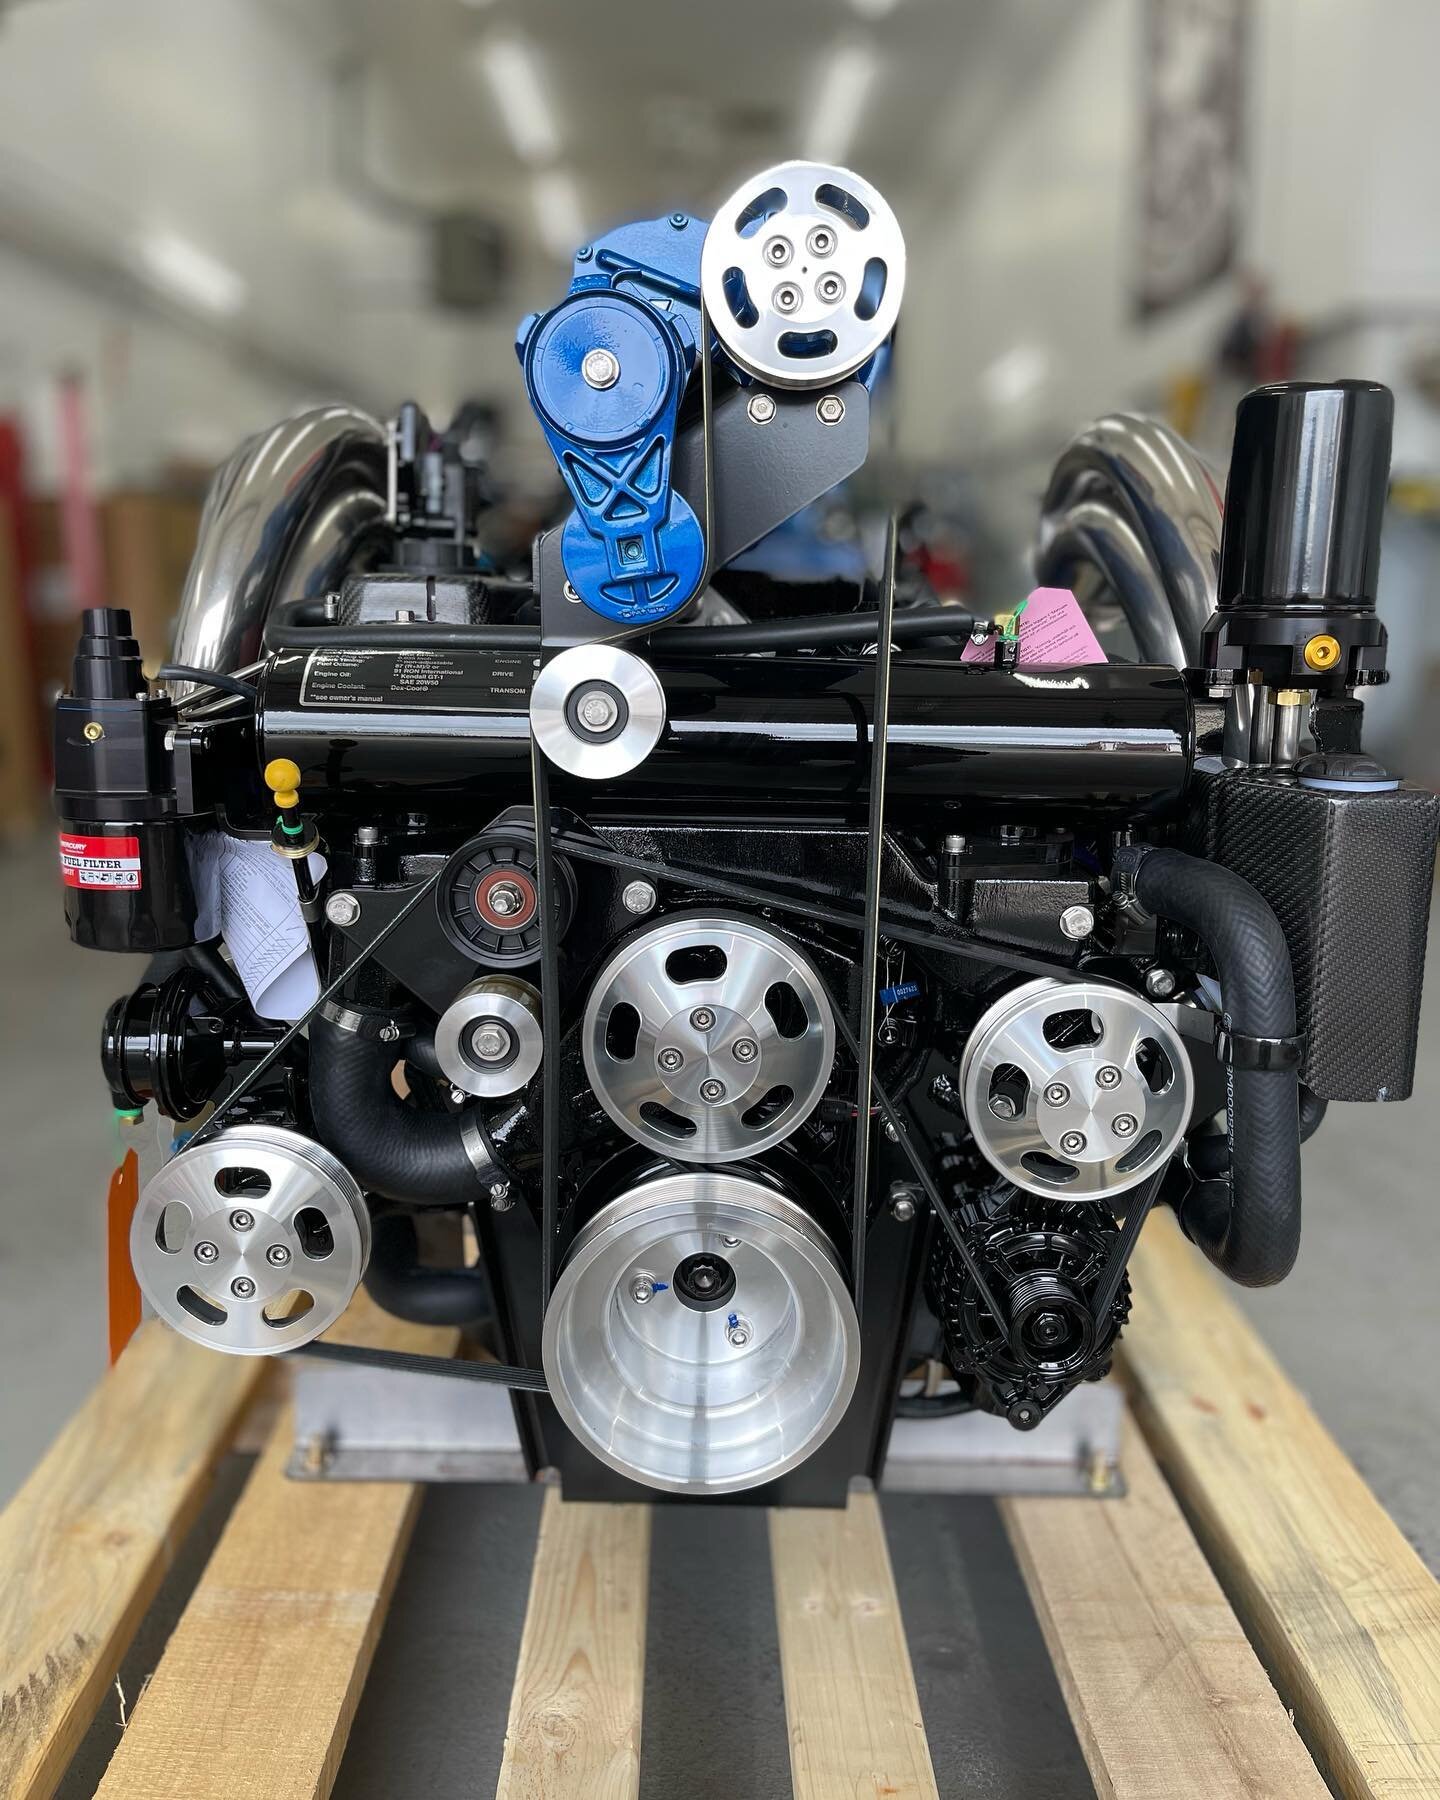 600SCi hot off the press for an upcoming customer build. 👀

We are a FULL line Mercury Premier Dealer. 

We sell anything from 3HP Kickers to Mercury Racing Power Packages.

Book your next build now.